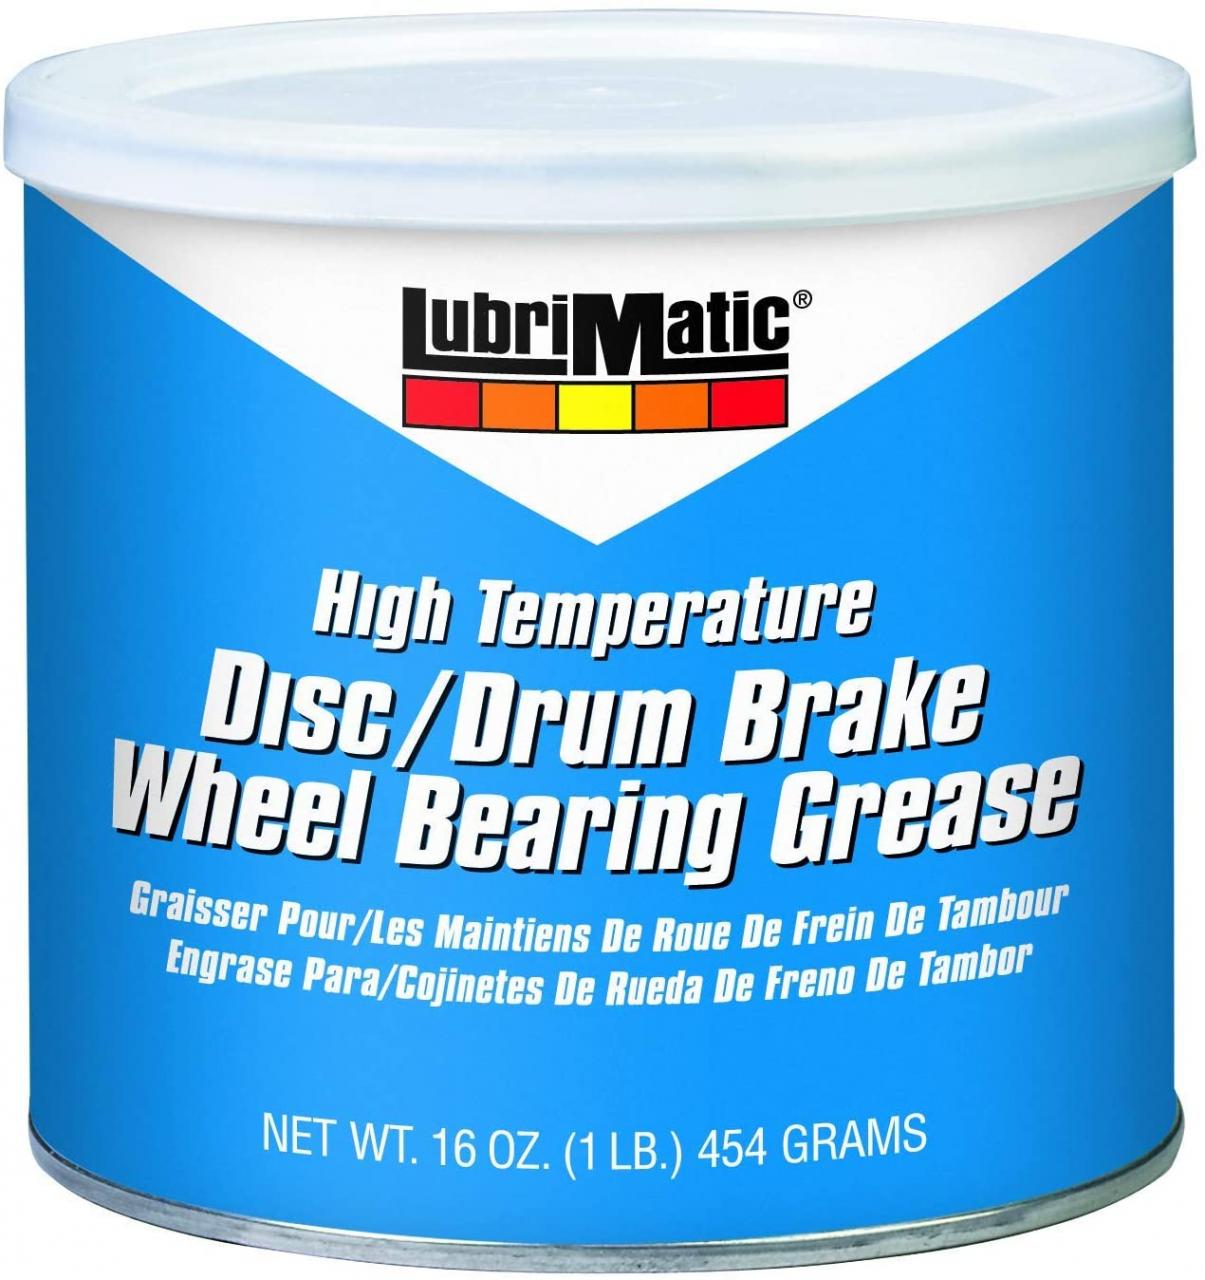 Trail(er)ing Along: Cleaning and Repacking Your Trailer's Wheel Bearings